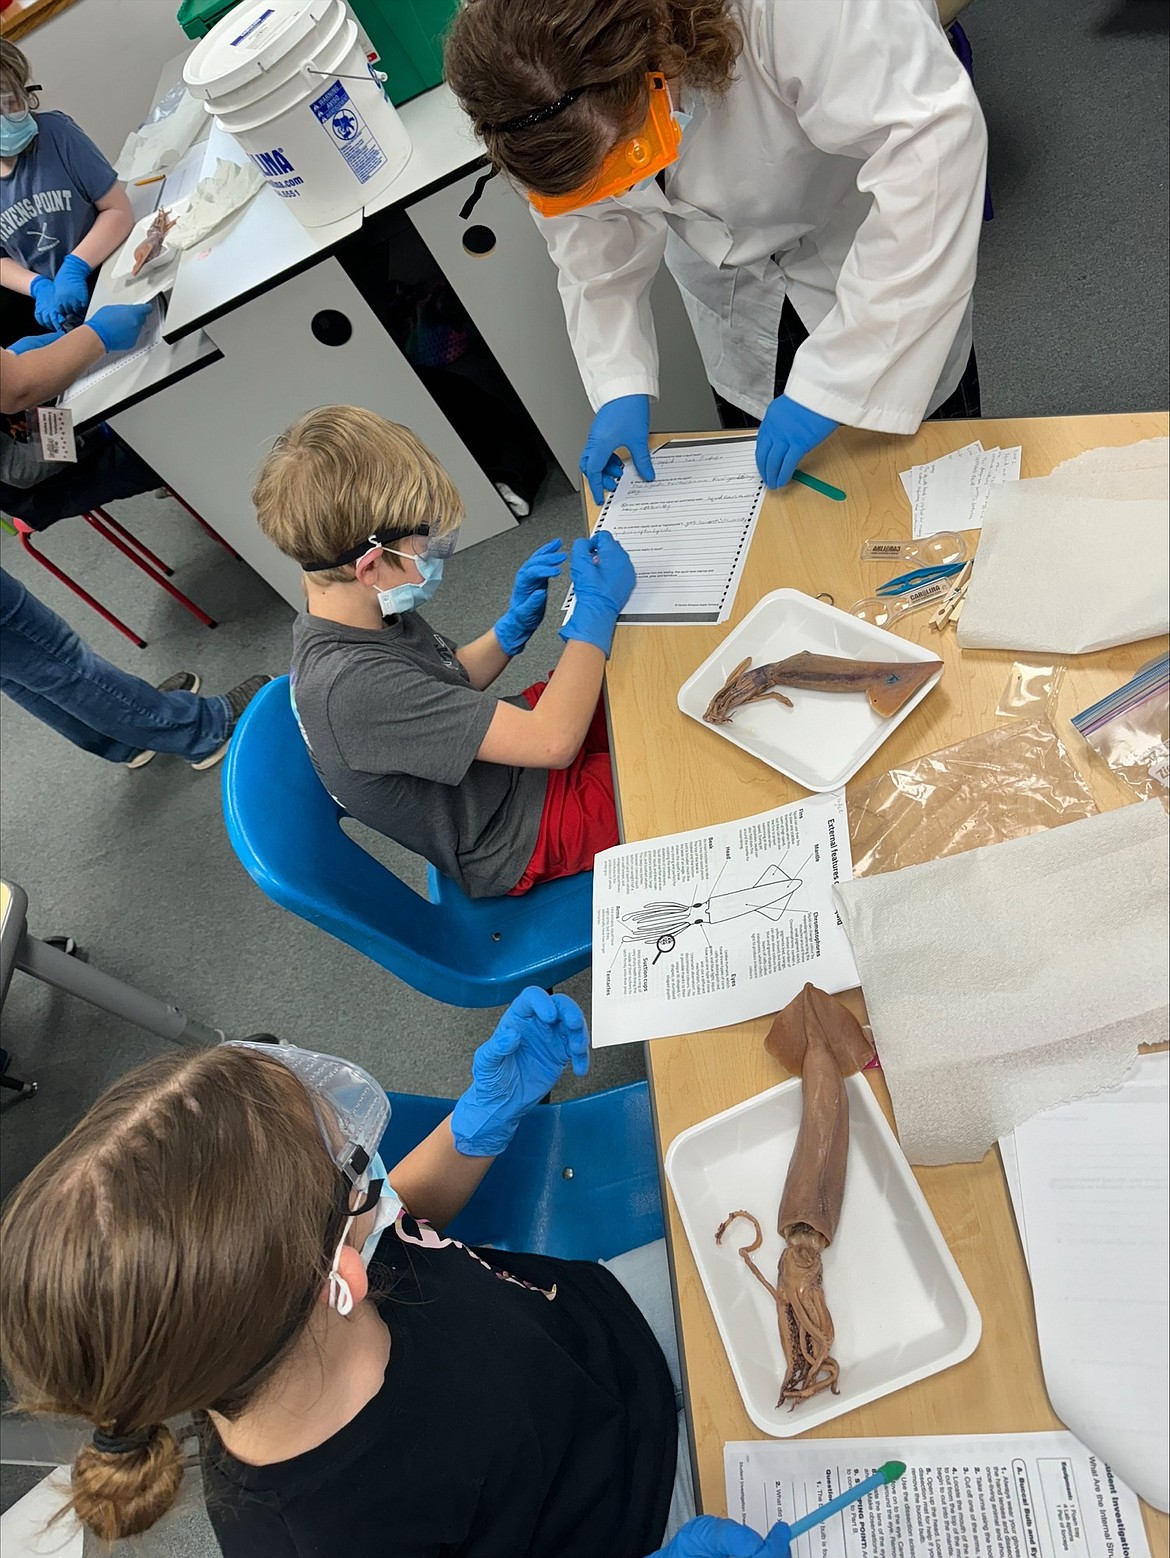 Idaho Hill fourth graders dissect a squid during a recent science class. According to Wikipedia, there are over 800 extant species of cephalopod, a category of marine animals which include squid, octopus, cuttlefish, or nautilus.